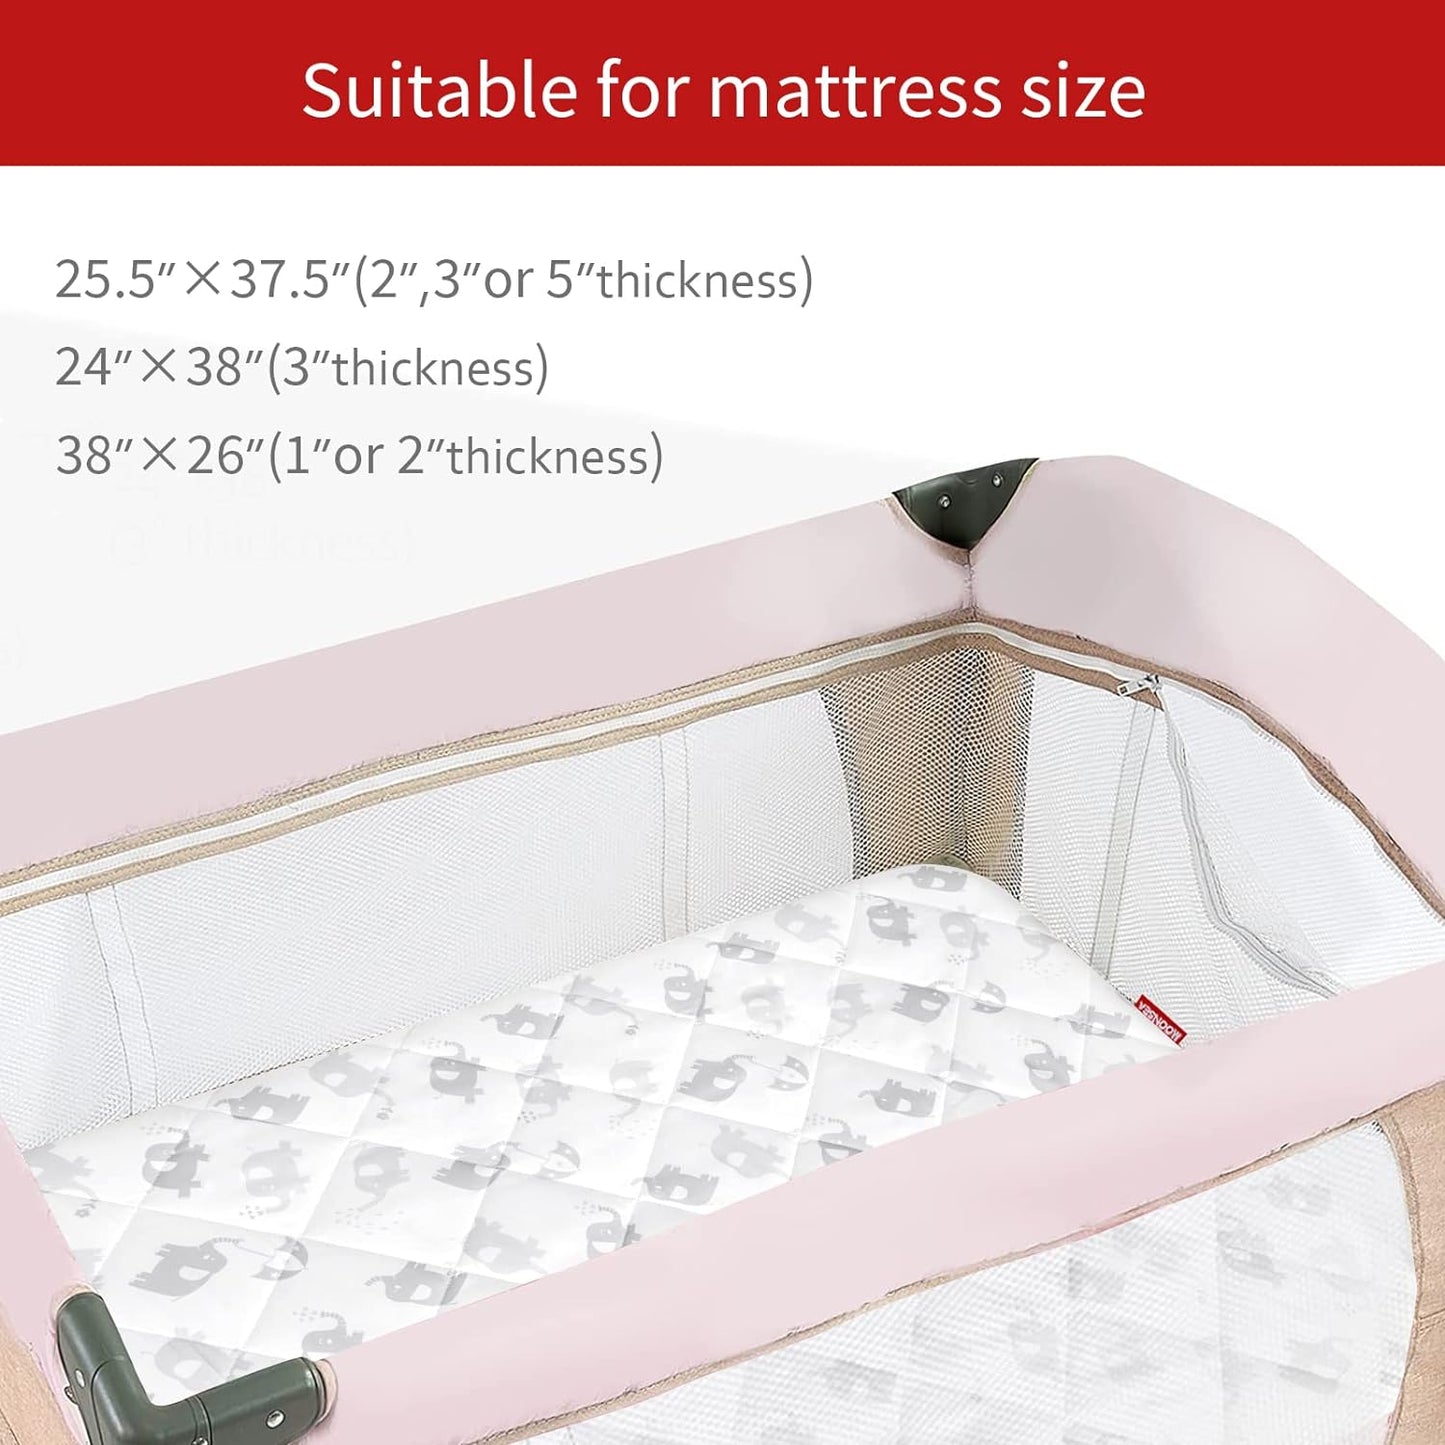 Pack n Play Sheet Quilted | Mini Crib Sheet - Pack and Play Mattress Pad Cover, Ultra-Soft Microfiber, Fits Graco Pack and Play, 2 Pack, Gray Star&Elephant